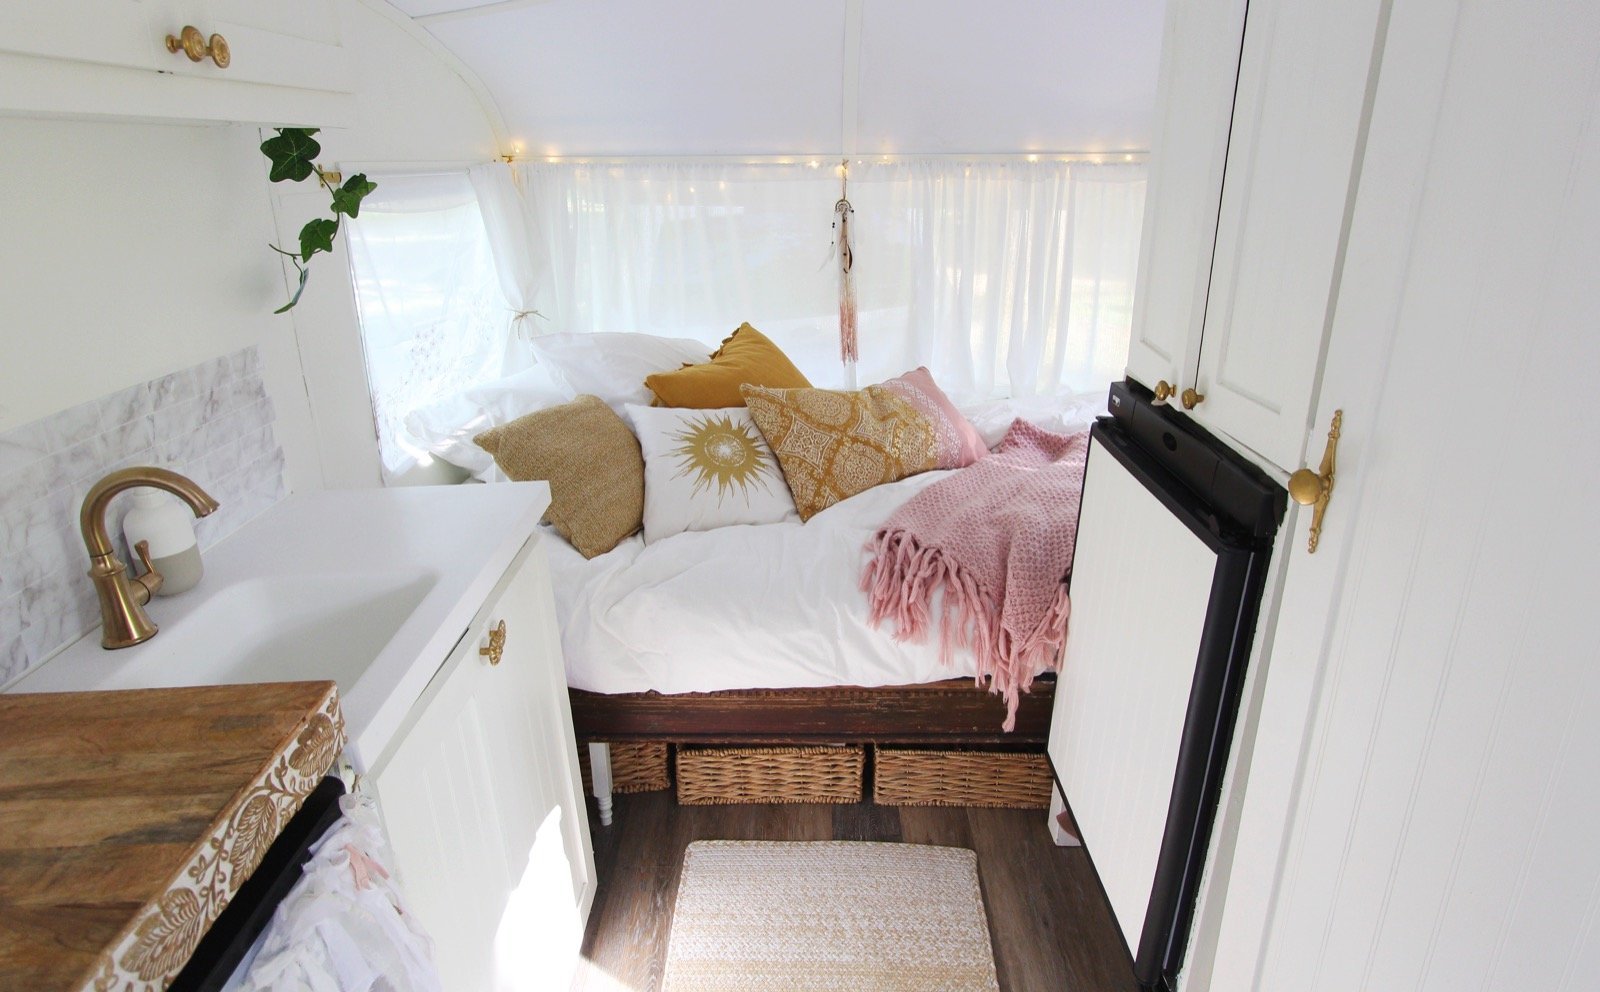 vintage-camper-classic-white-gold-reno-inspirations-ideas-boho-gypsy-hippy-pearl-musician-singer-songwriter-interior9